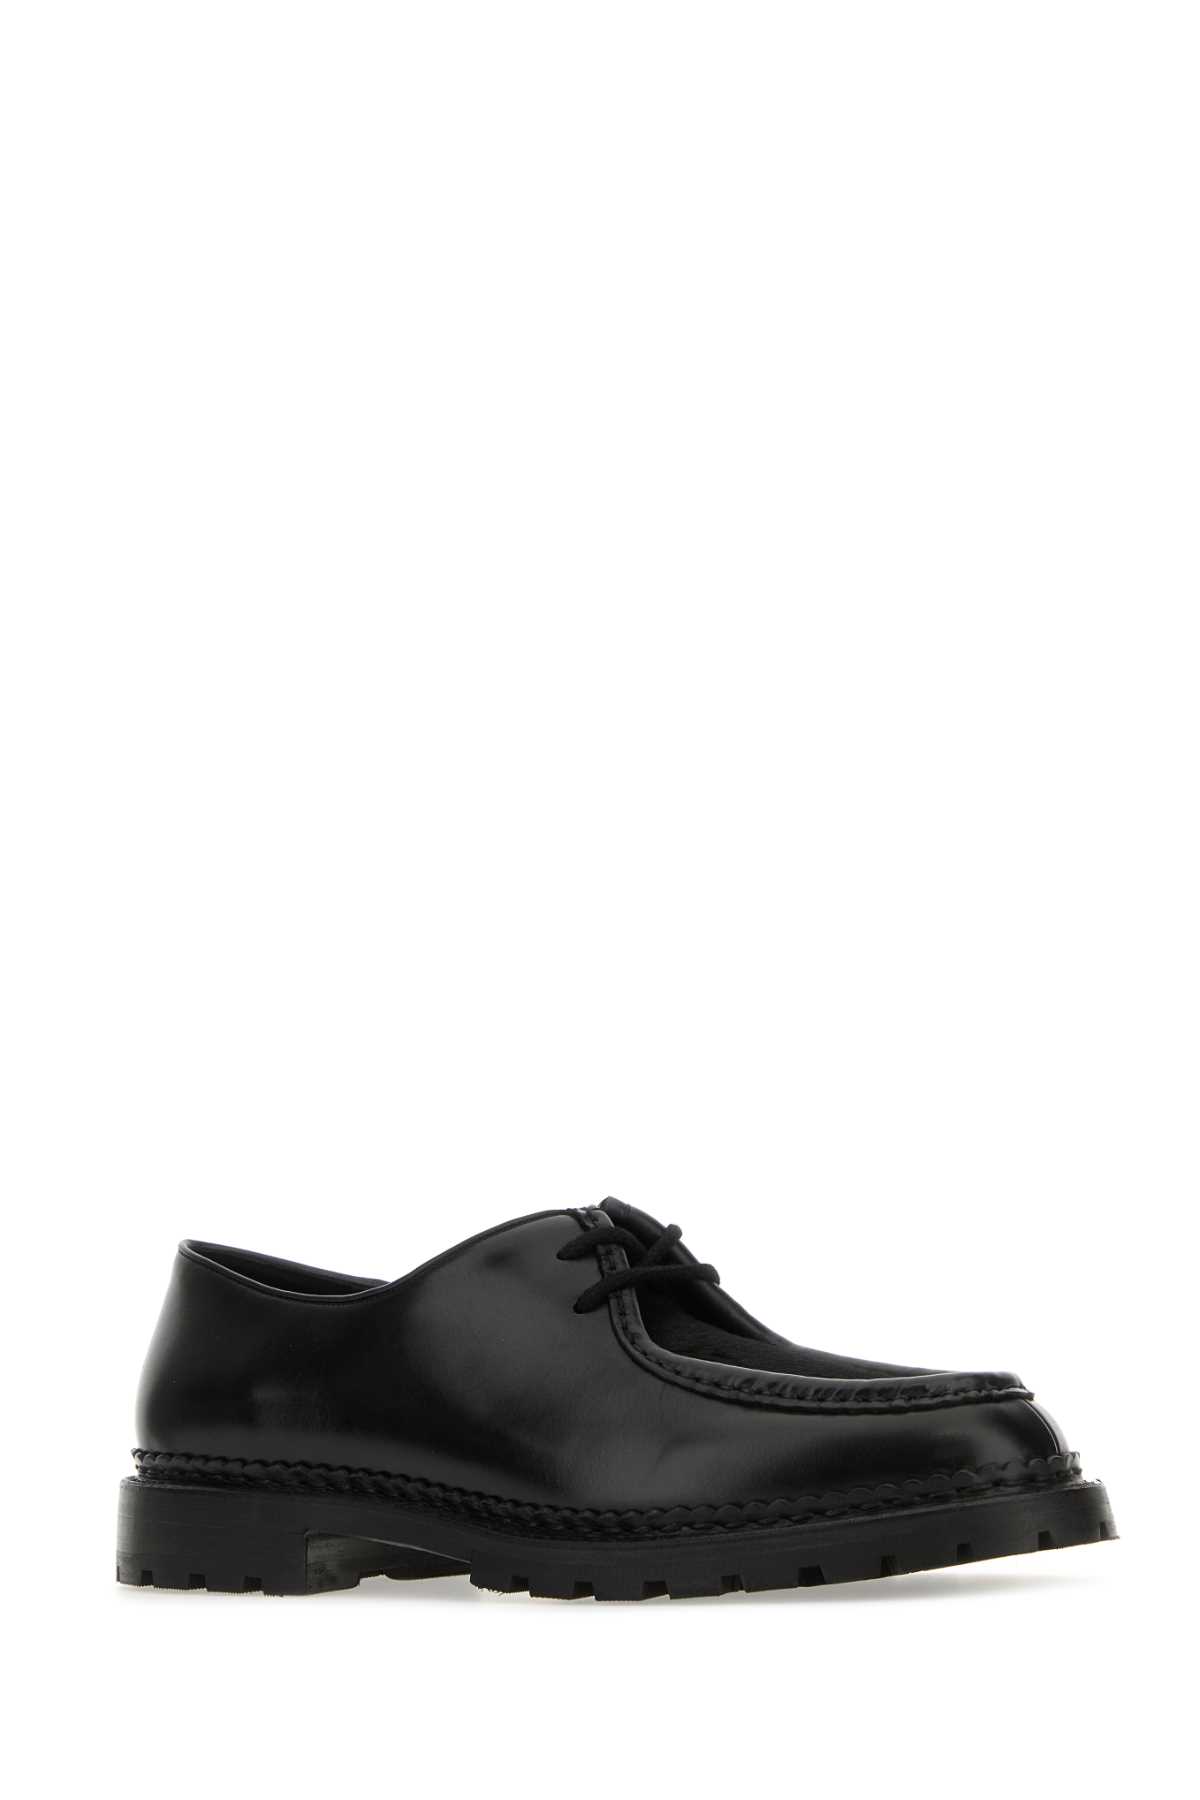 Saint Laurent Black Leather And Calf Hair Lace-up Shoes In Neroneronero